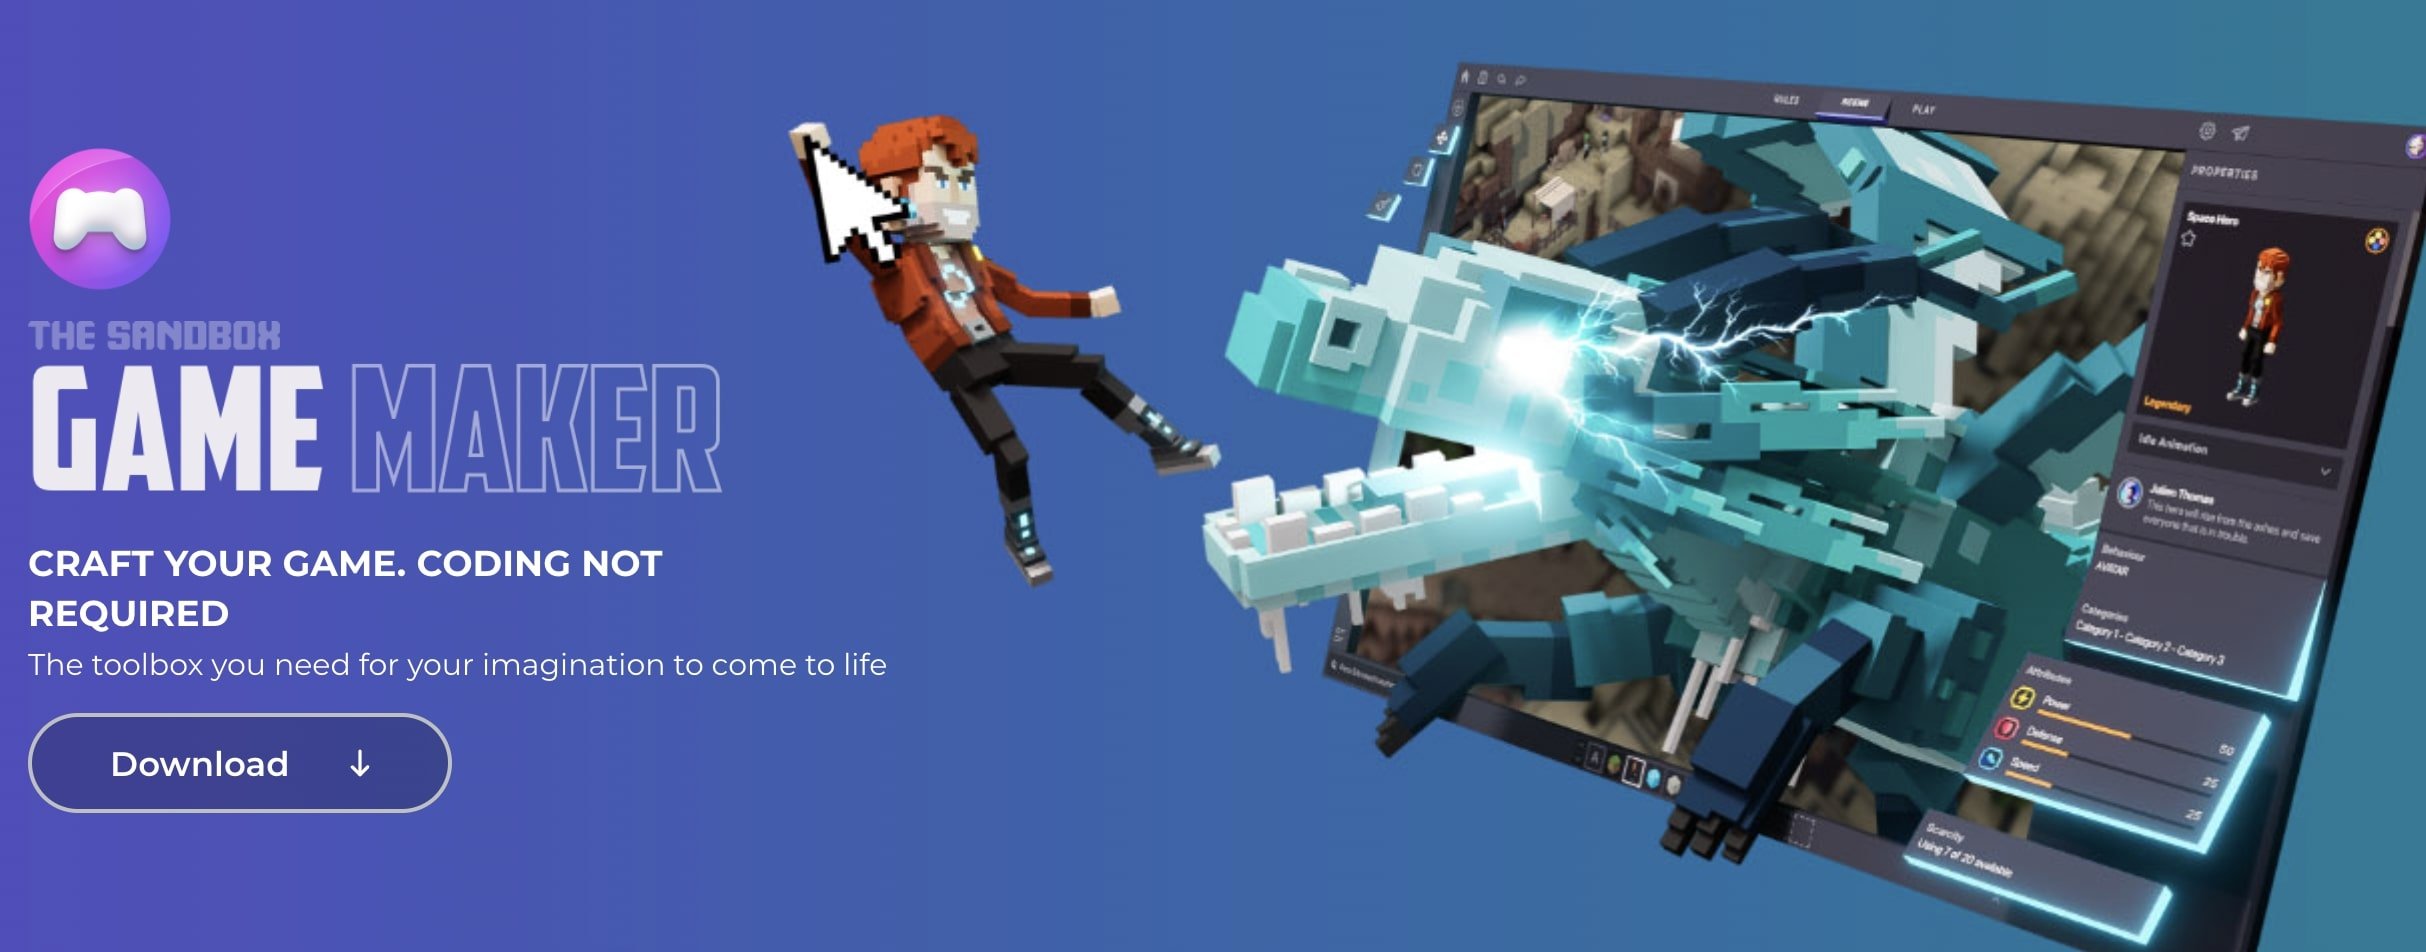 The Sandbox’s Game Maker tool showing a human and dragon fighting